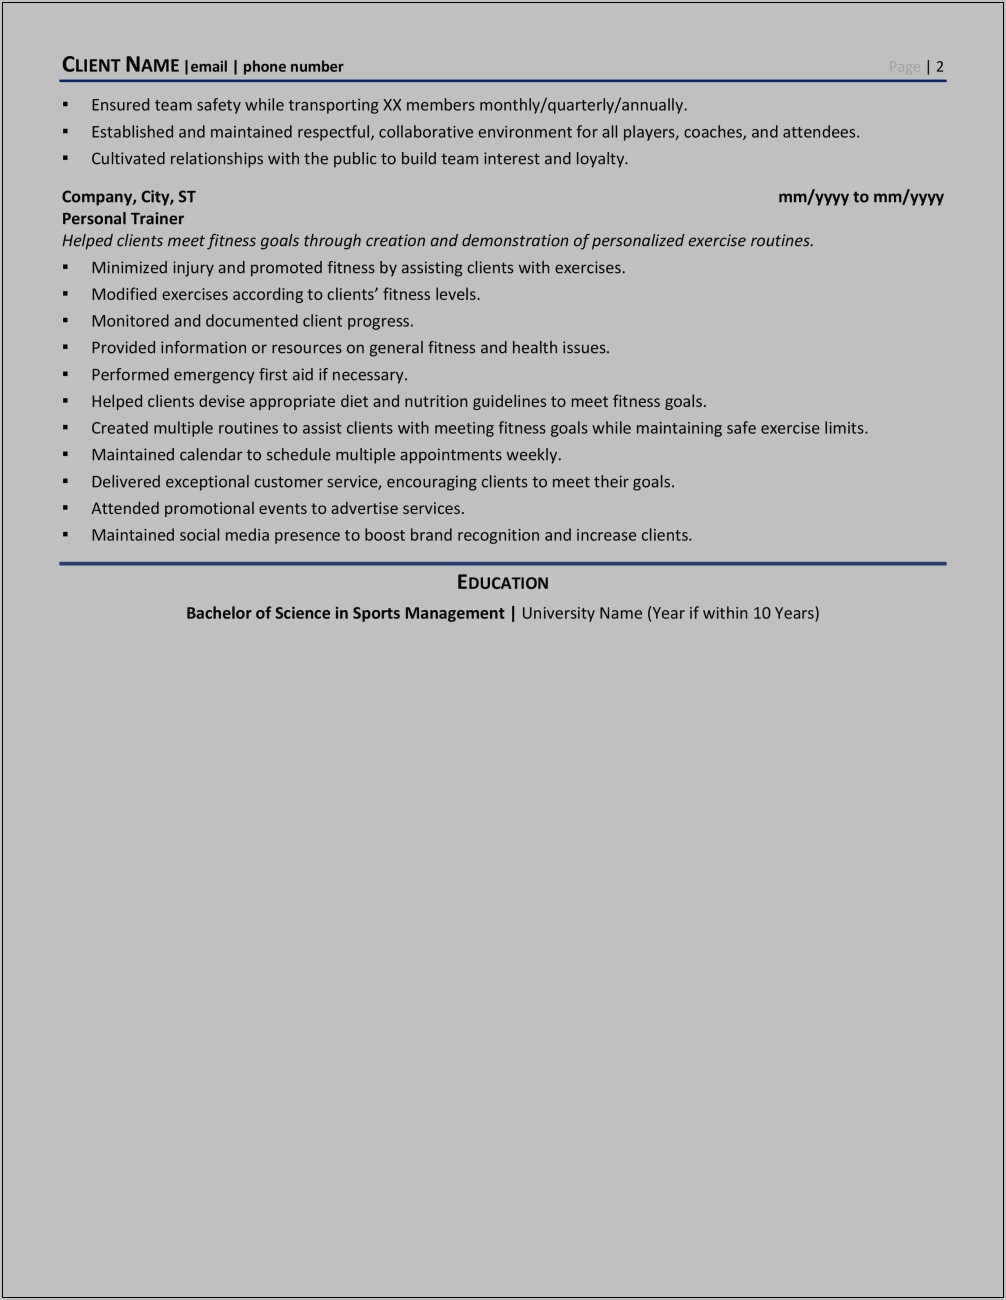 Sample Coaching Resume With Achievements